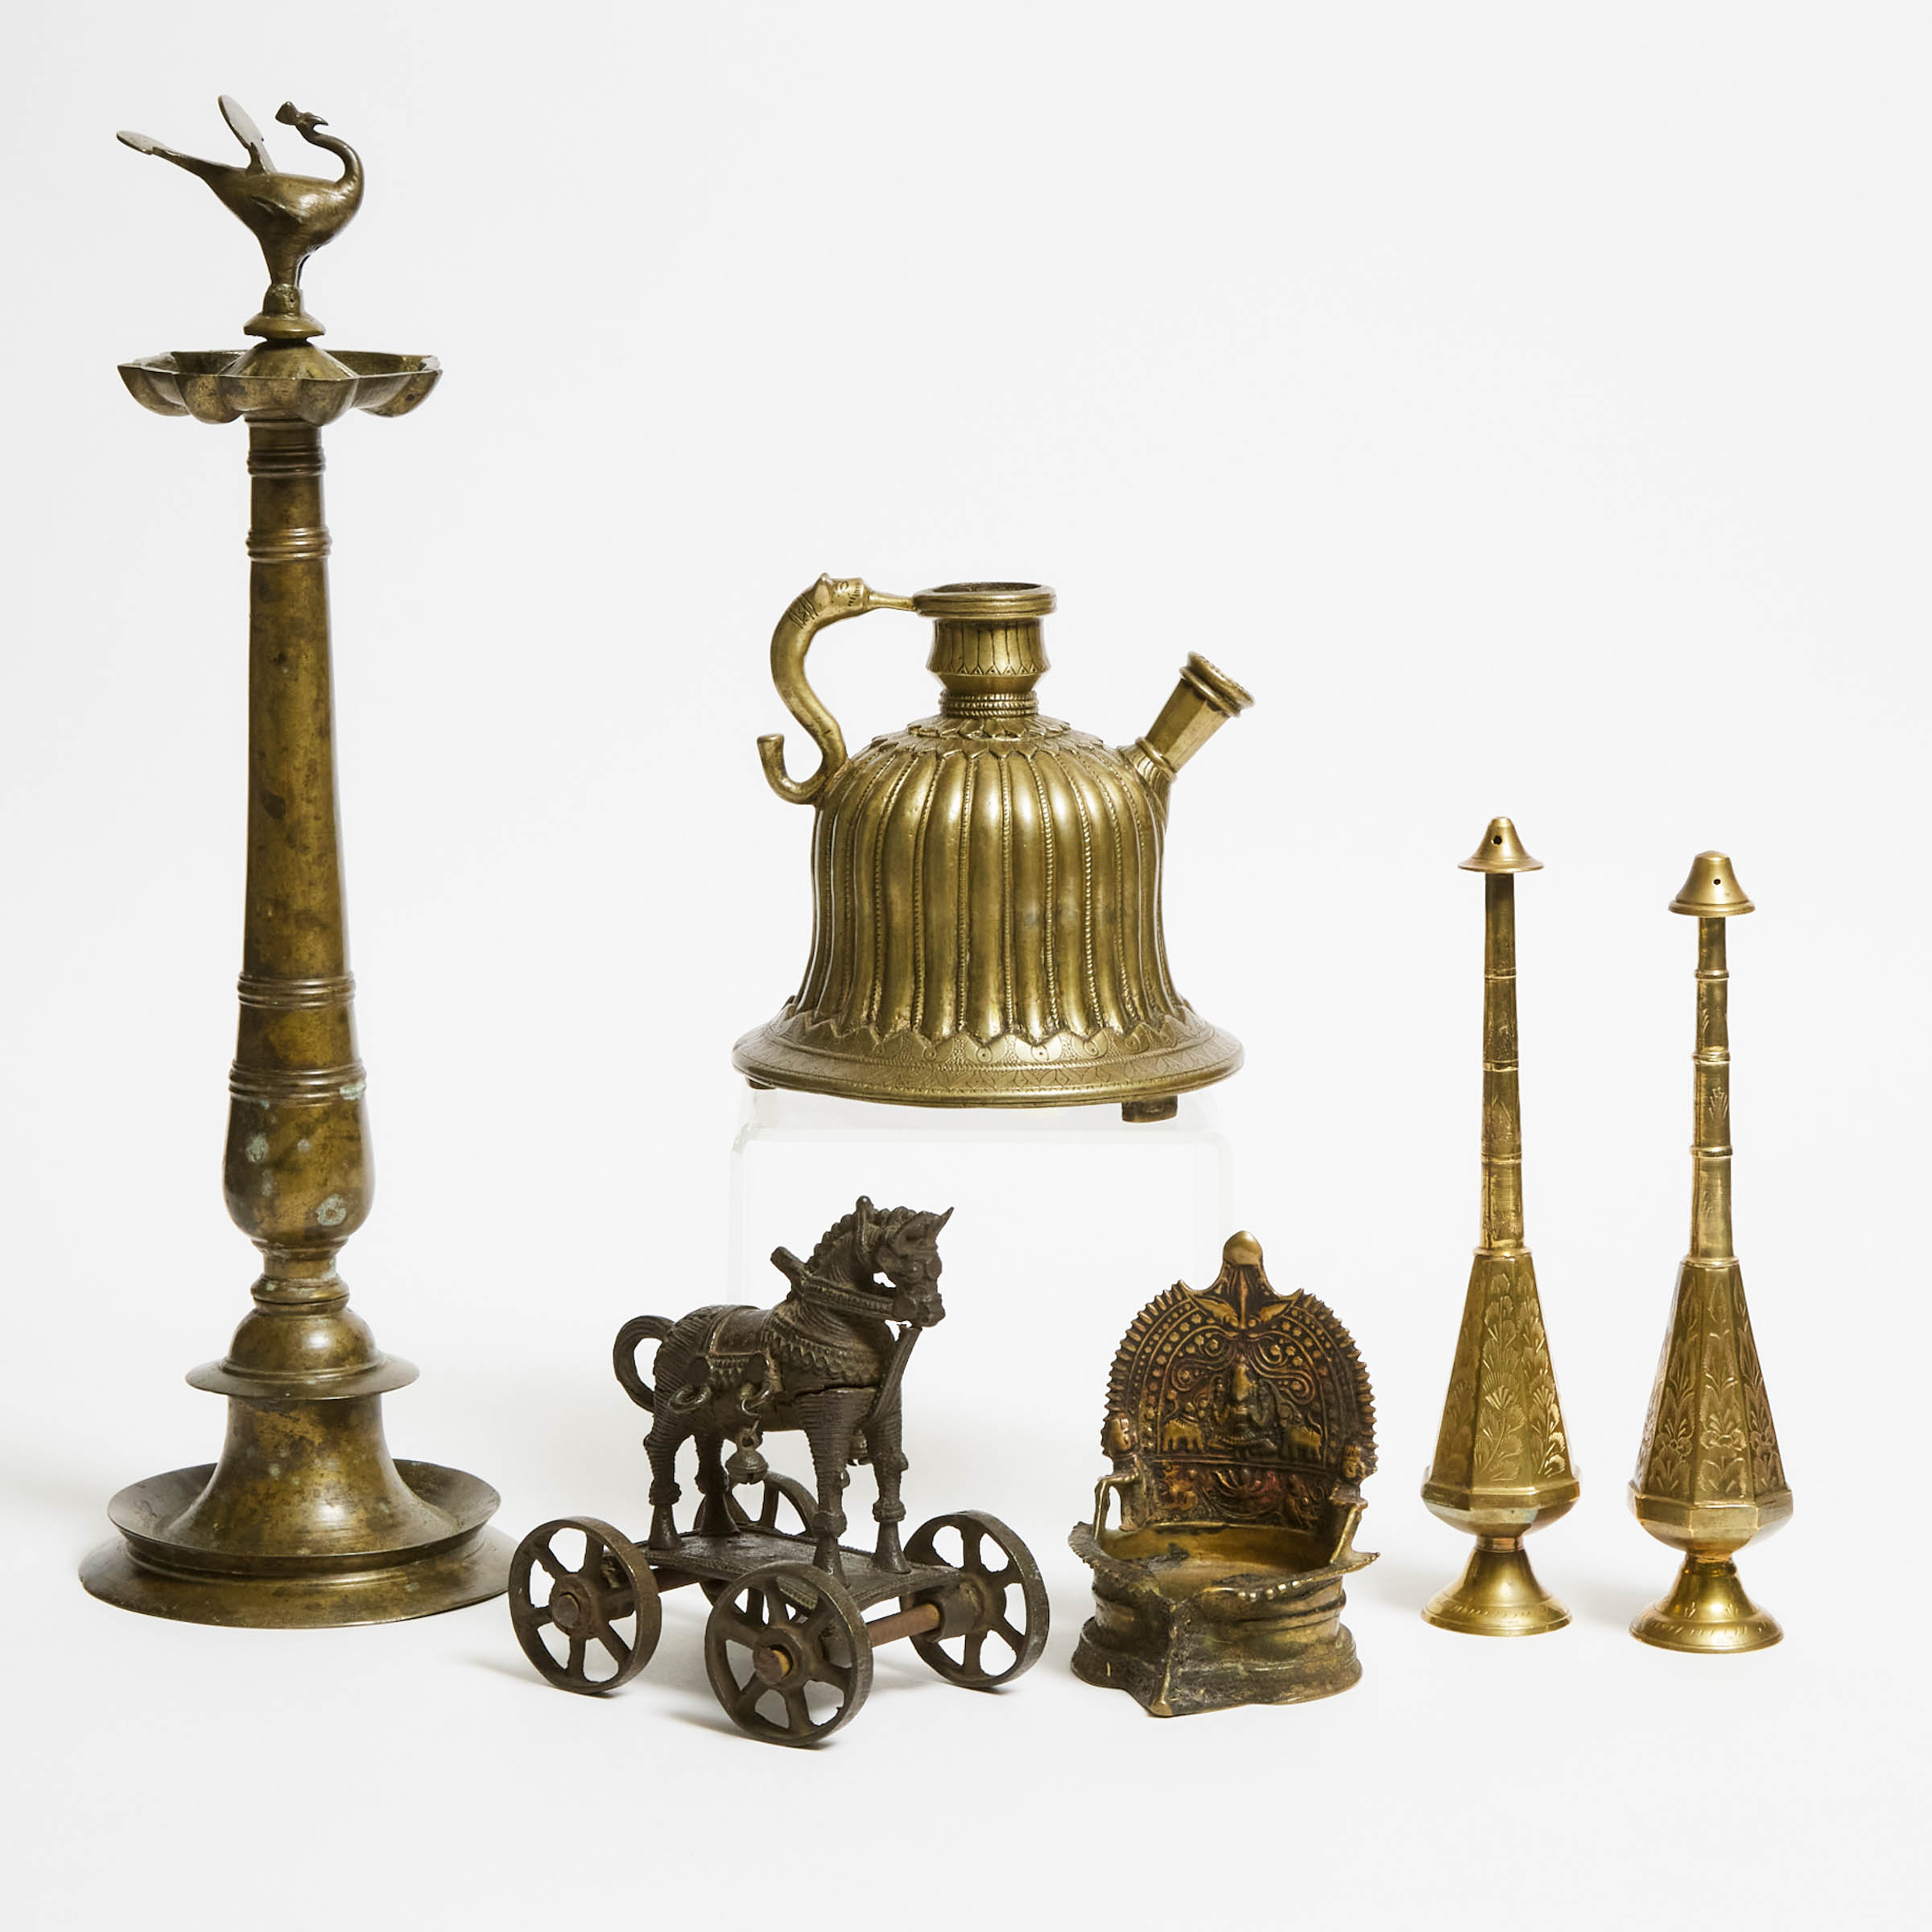 A Group of Six Indian Bronze Vessels and Objects, 19th Century